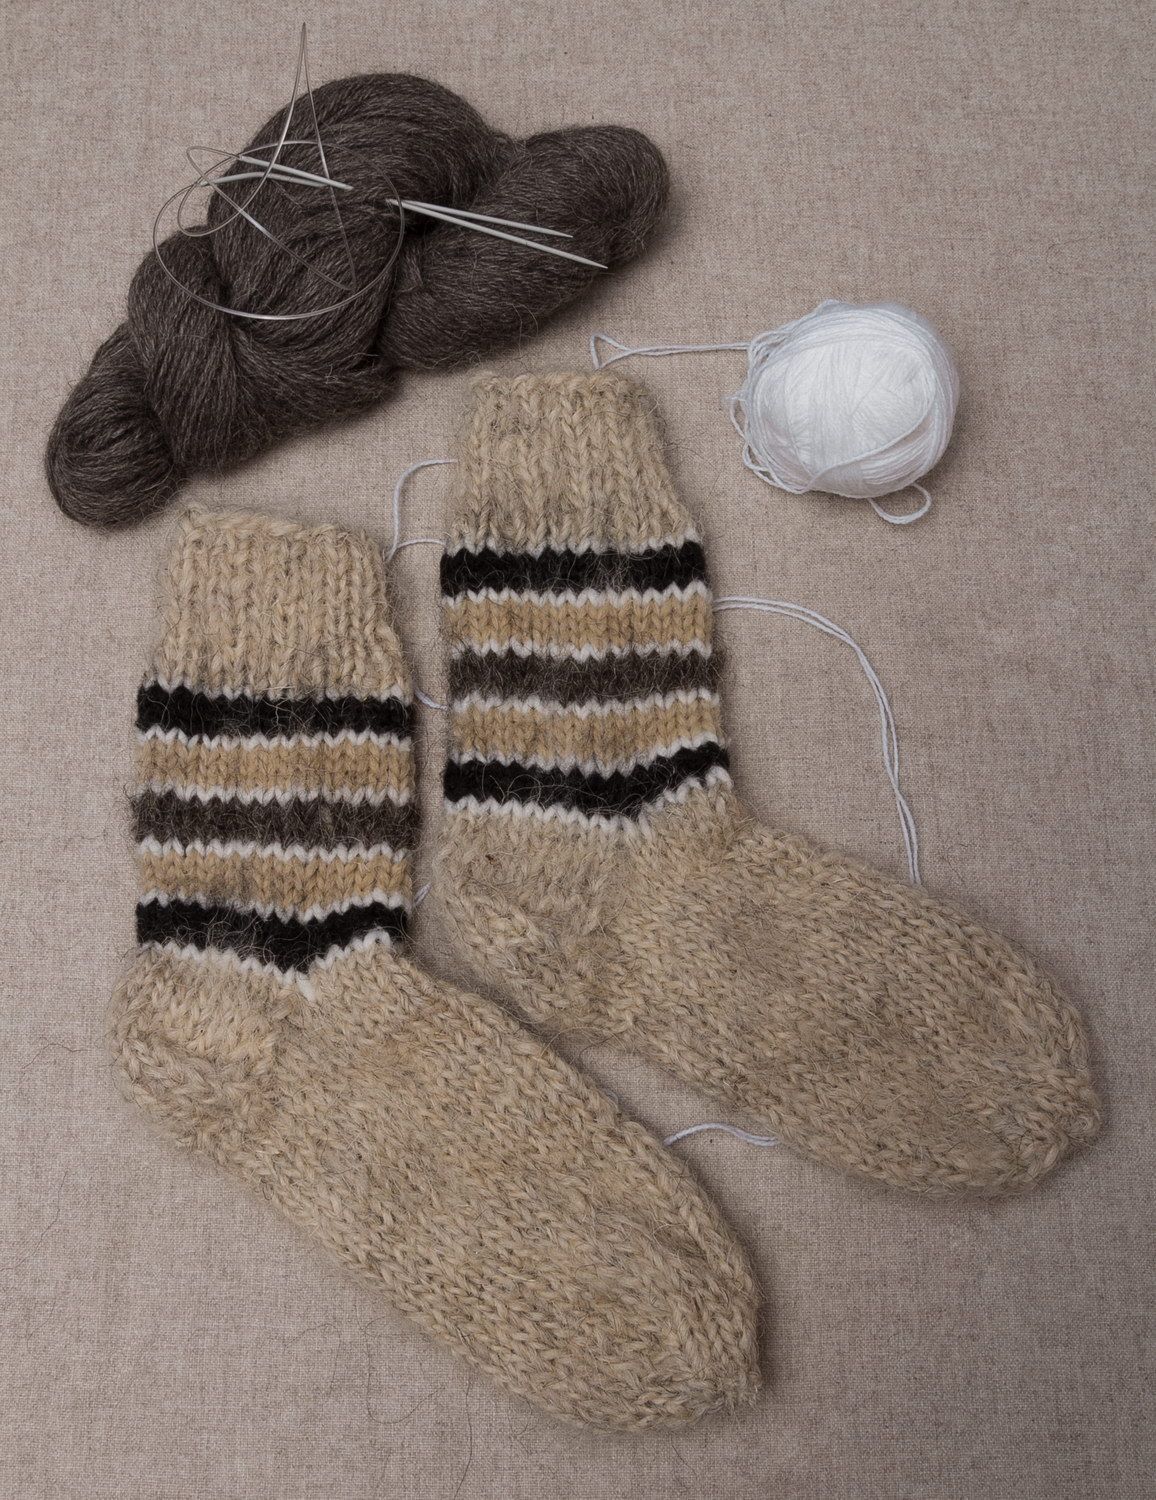 Women's knitted socks made of natural wool photo 1